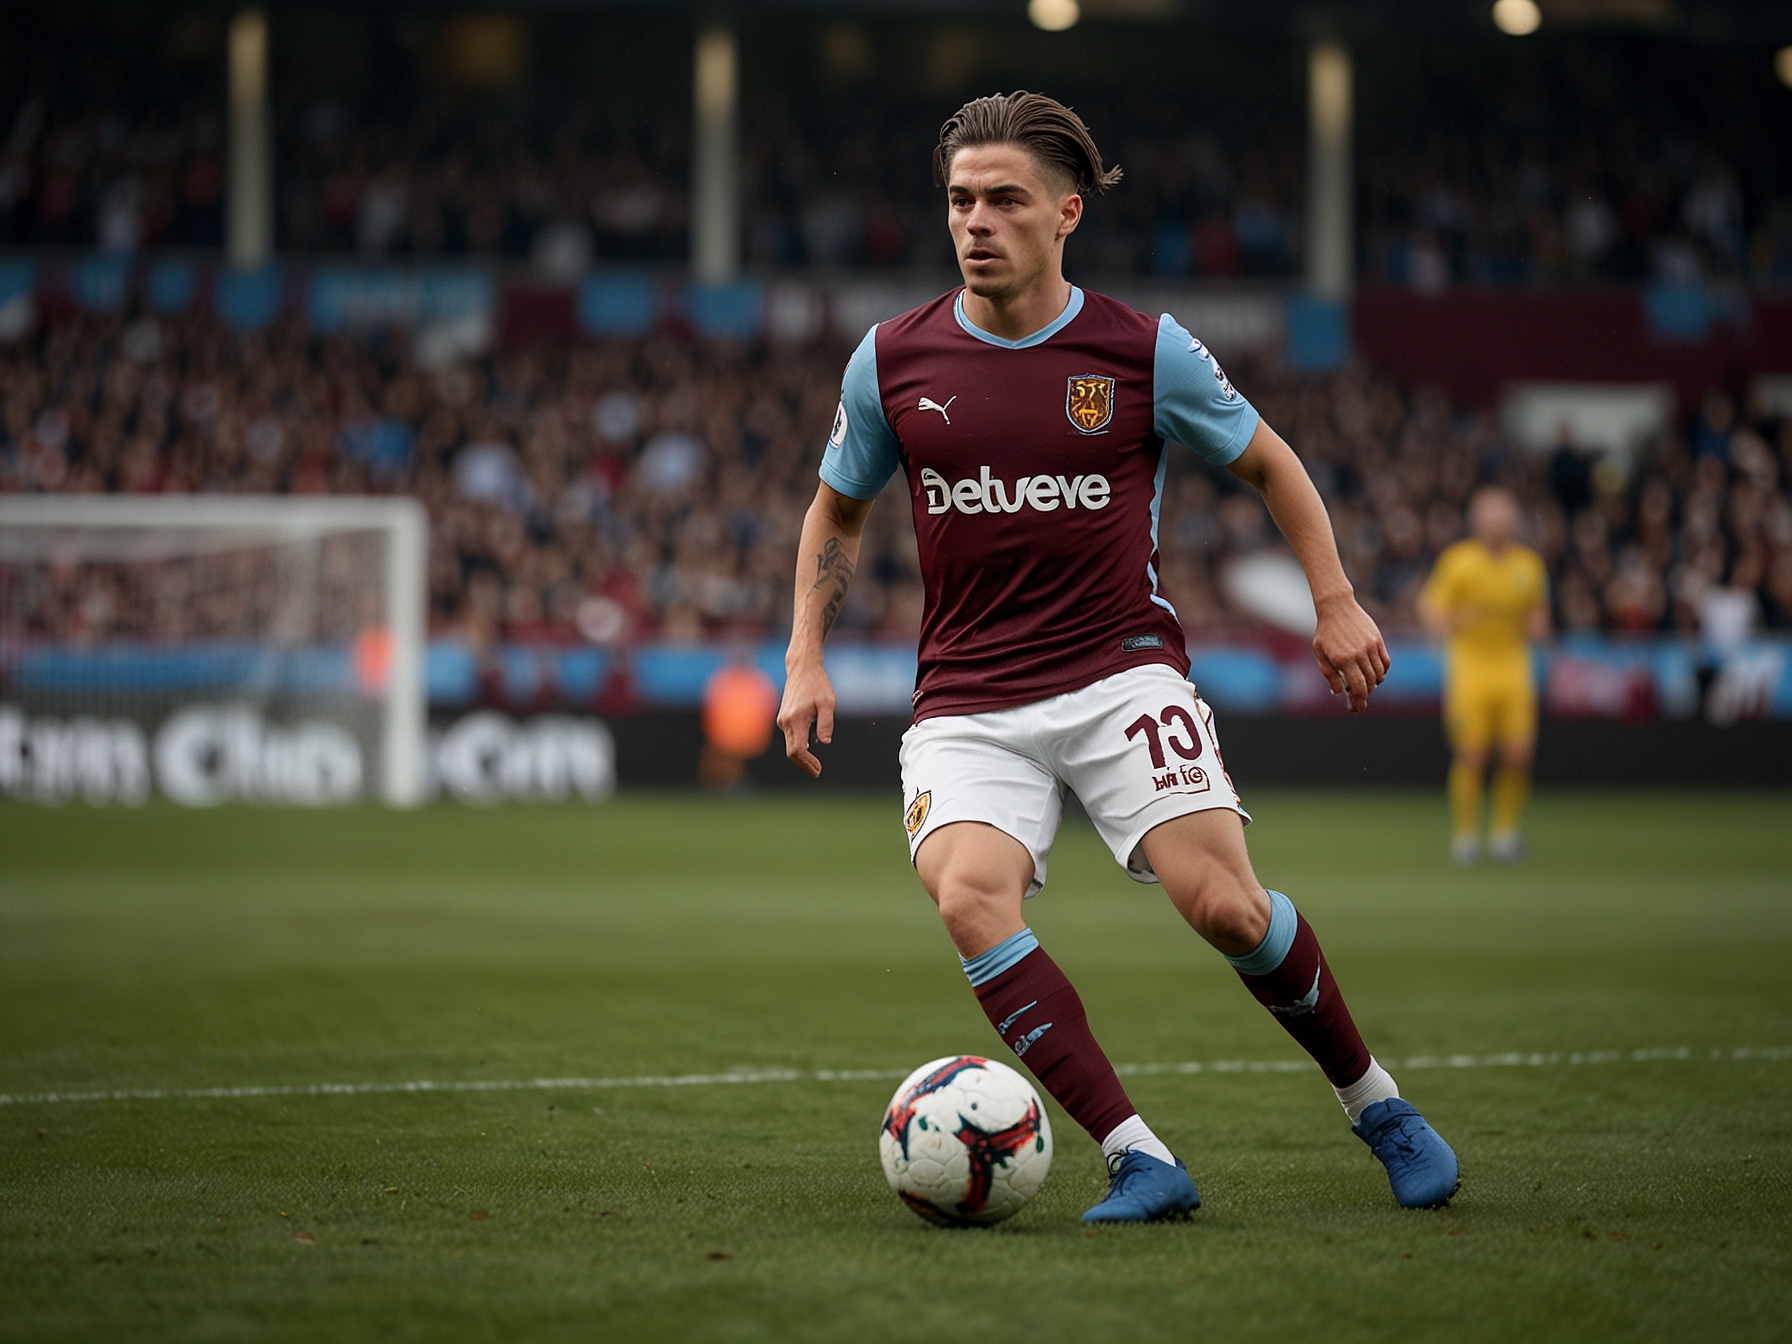 Jack Grealish expertly dribbles past defenders on the field, demonstrating his ball control and vision. This showcases his ability to create goal-scoring opportunities for teammates.